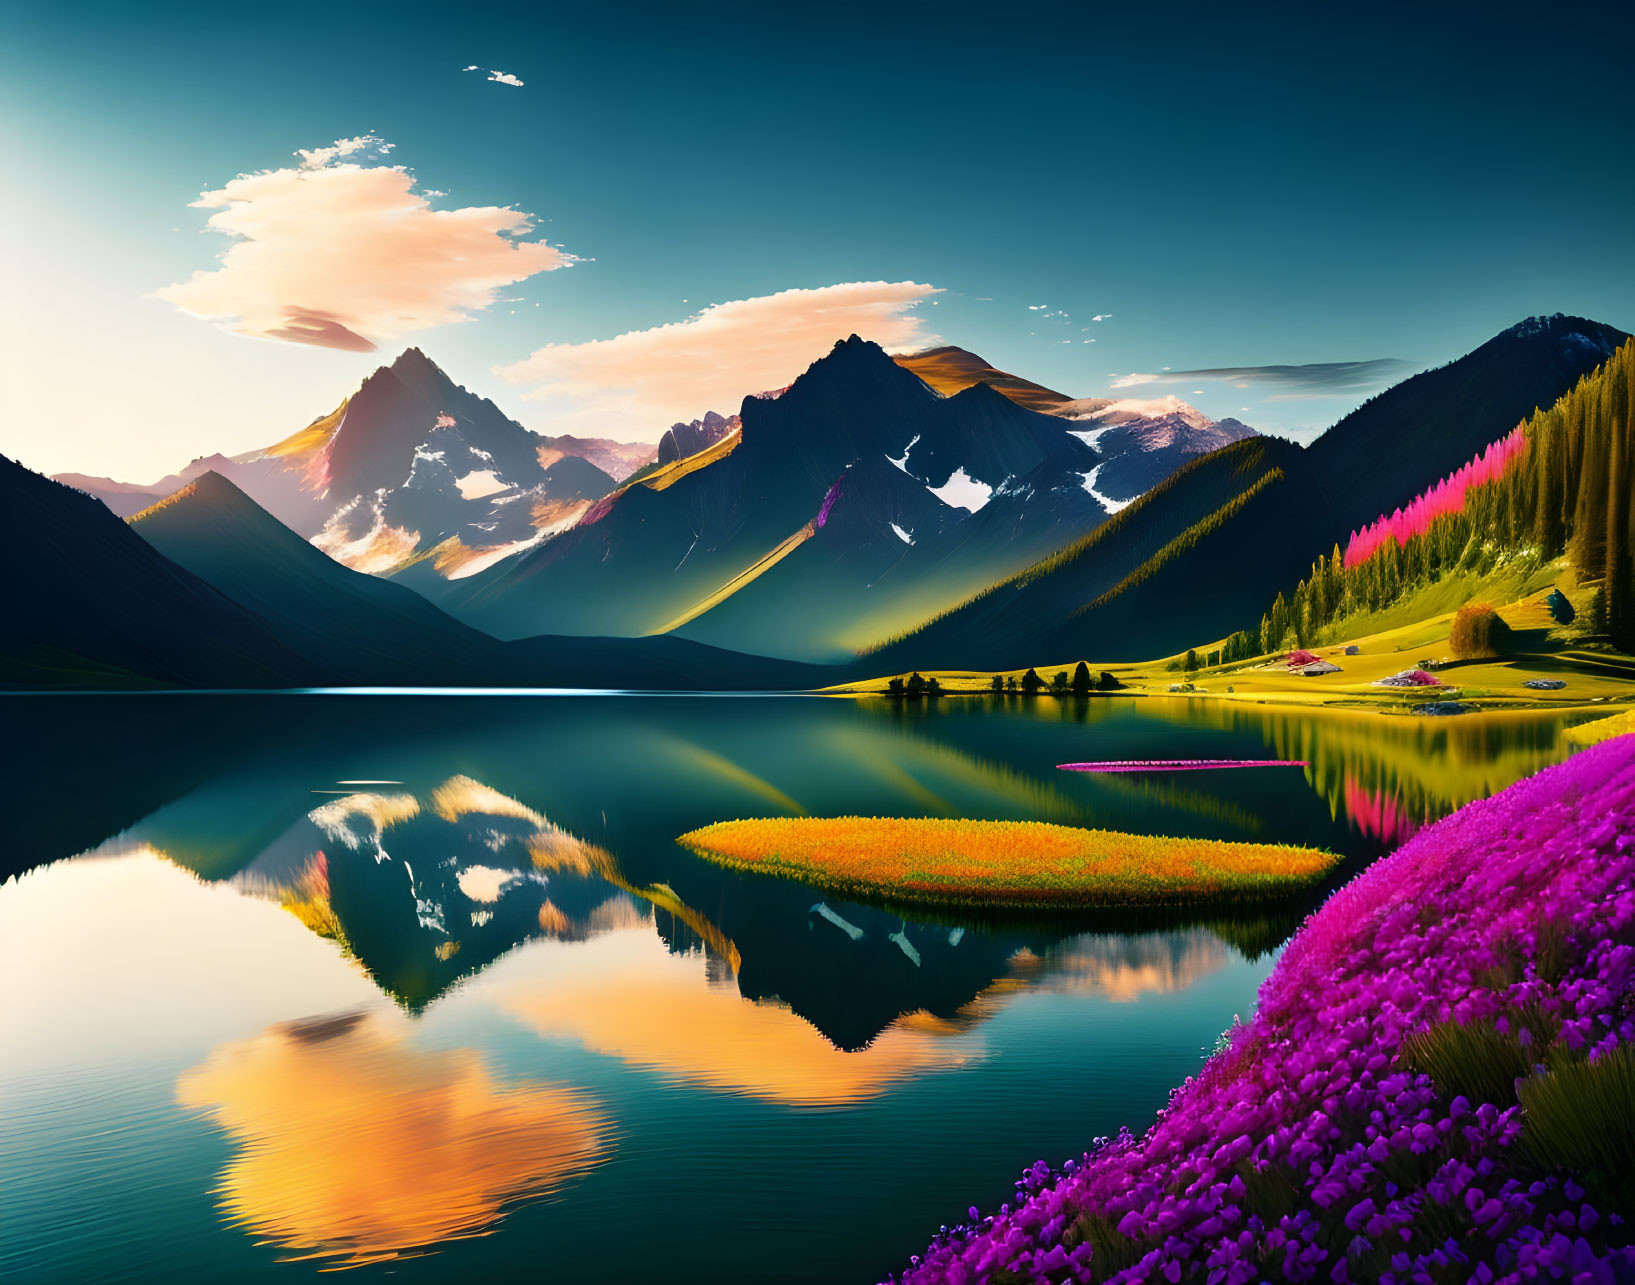 Harmony of Perfection: A Breathtaking Landscape